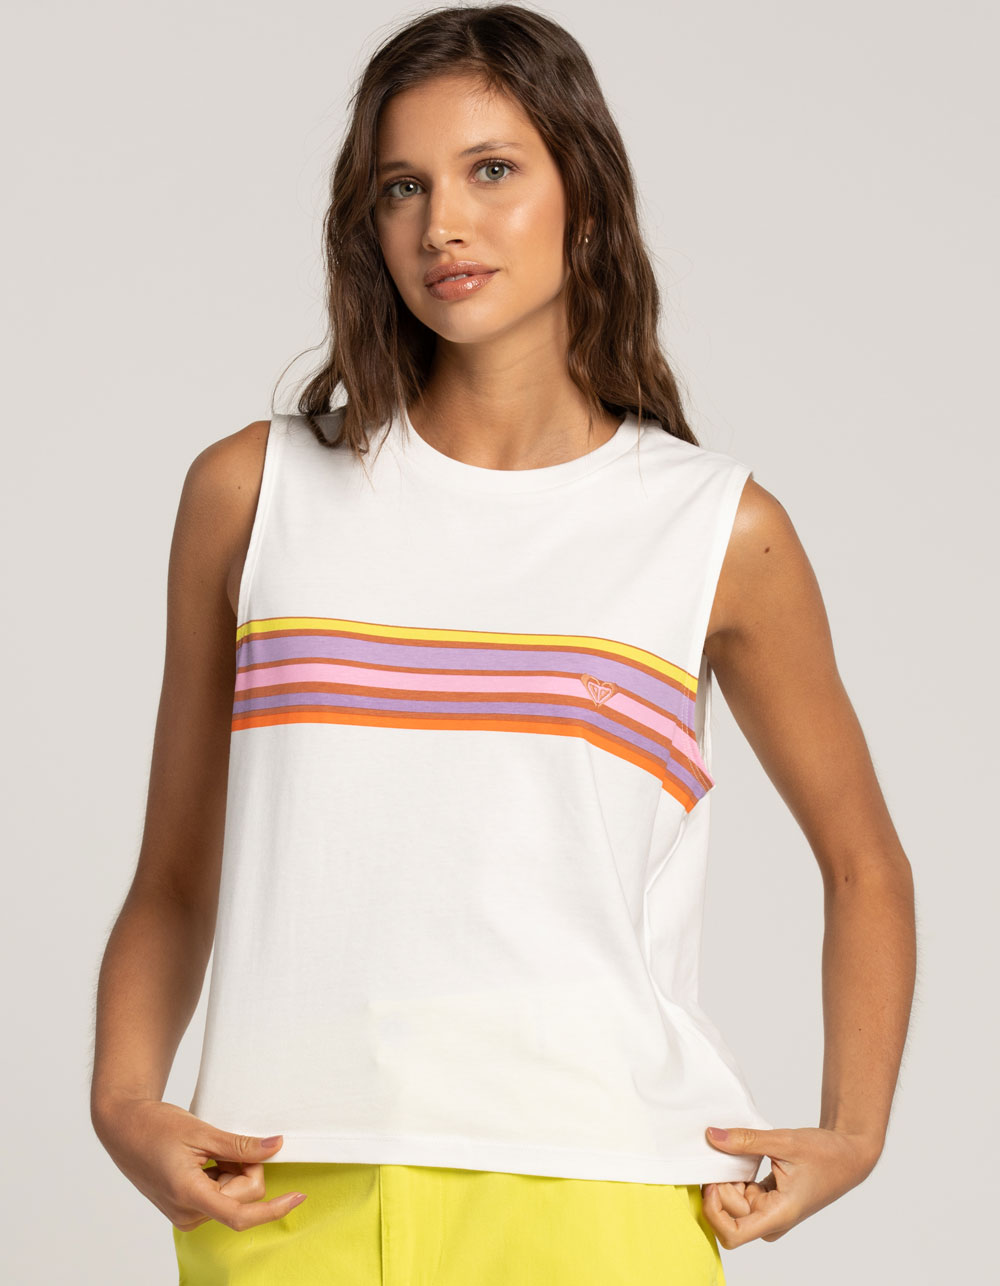 ROXY x Kate - | Muscle Tillys Kind WHITE Kate Womens Surf Bosworth Tee